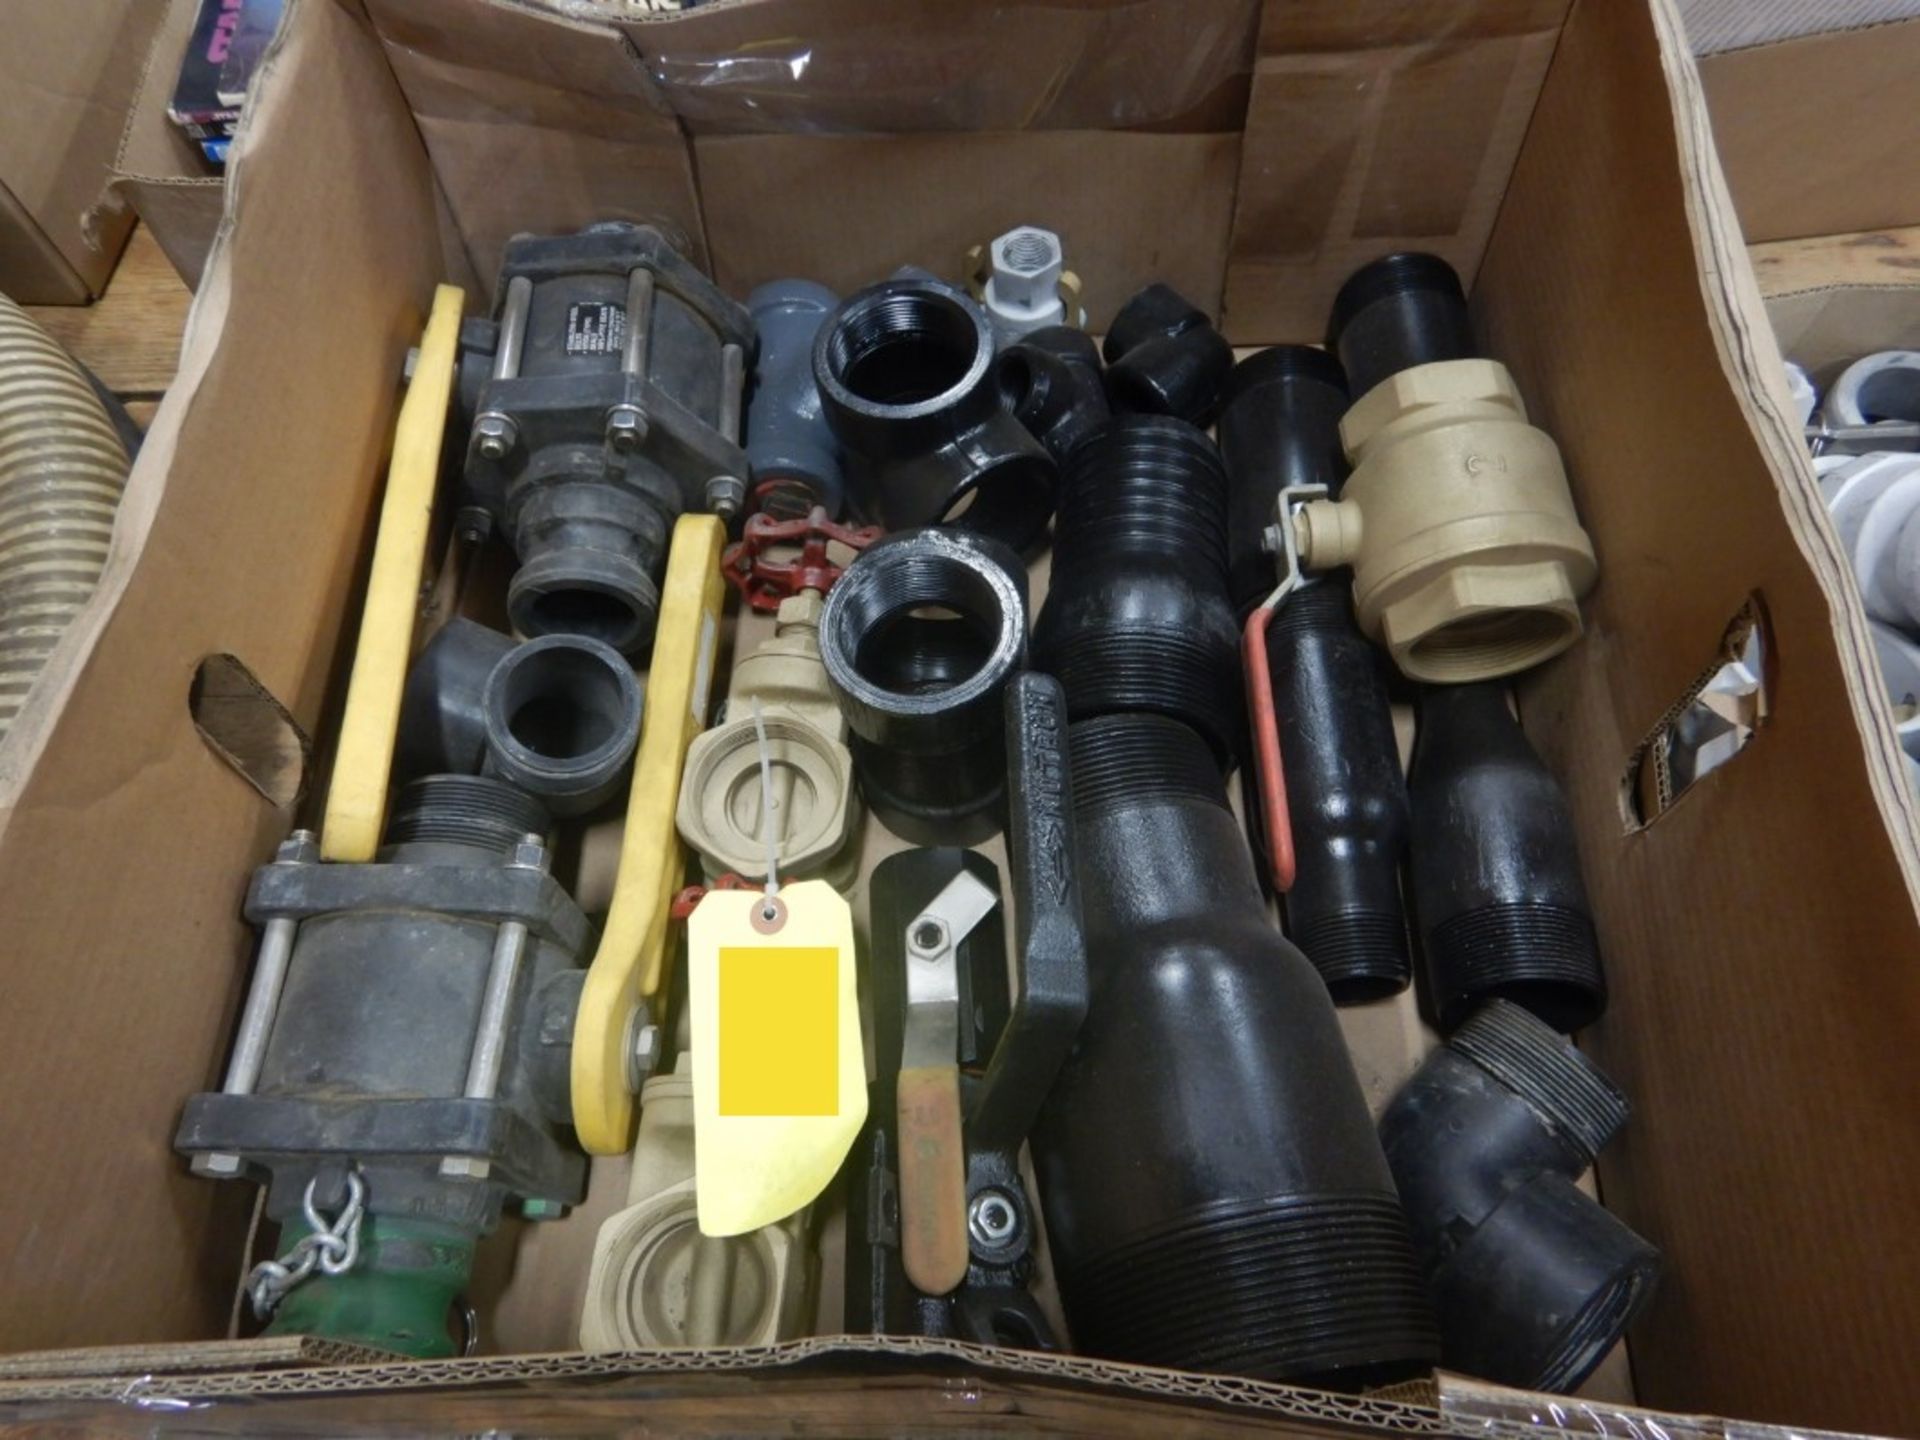 L/O ASSORTED VALVES, FITTINGS, SWEDGES, REDUCERS, ETC.